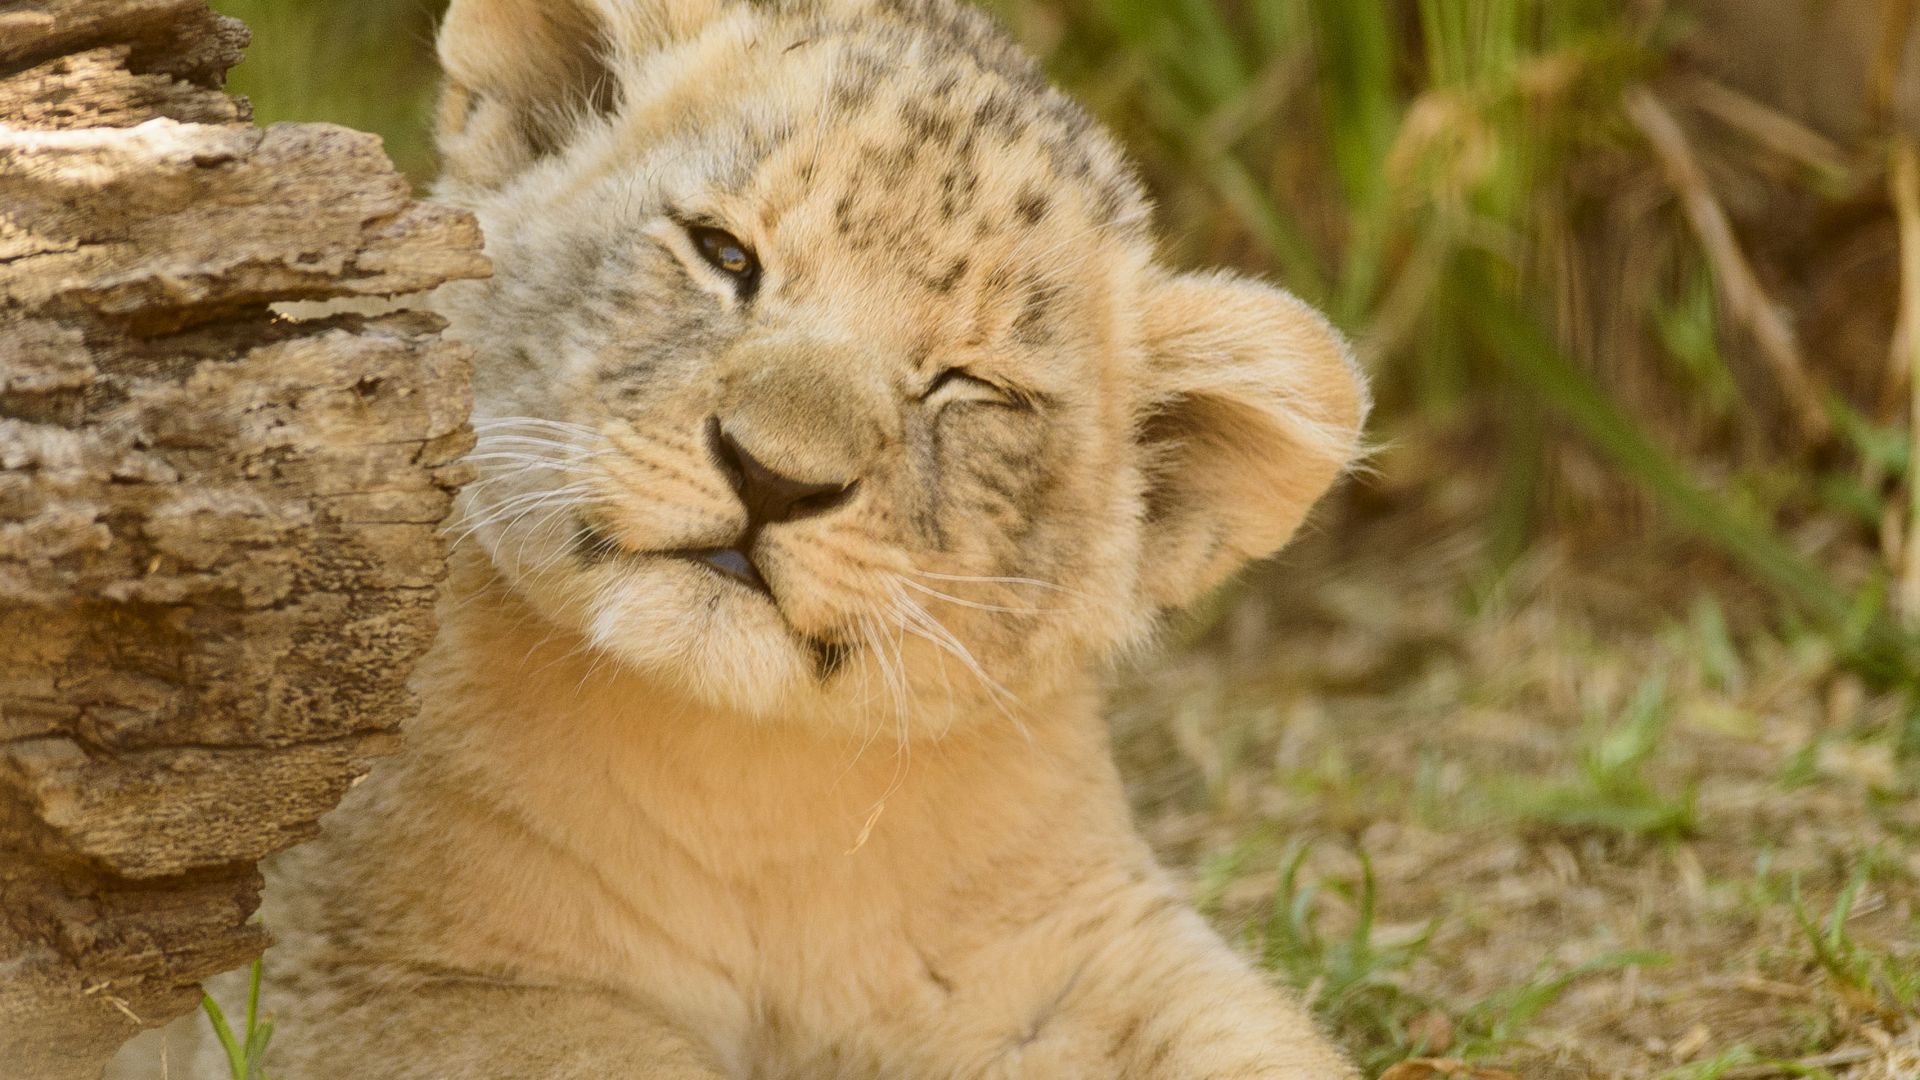 Desktop Wallpaper Lion Cub, Baby Animal, Cute, Play, 4k, HD Image, Picture, Background, 419cb1